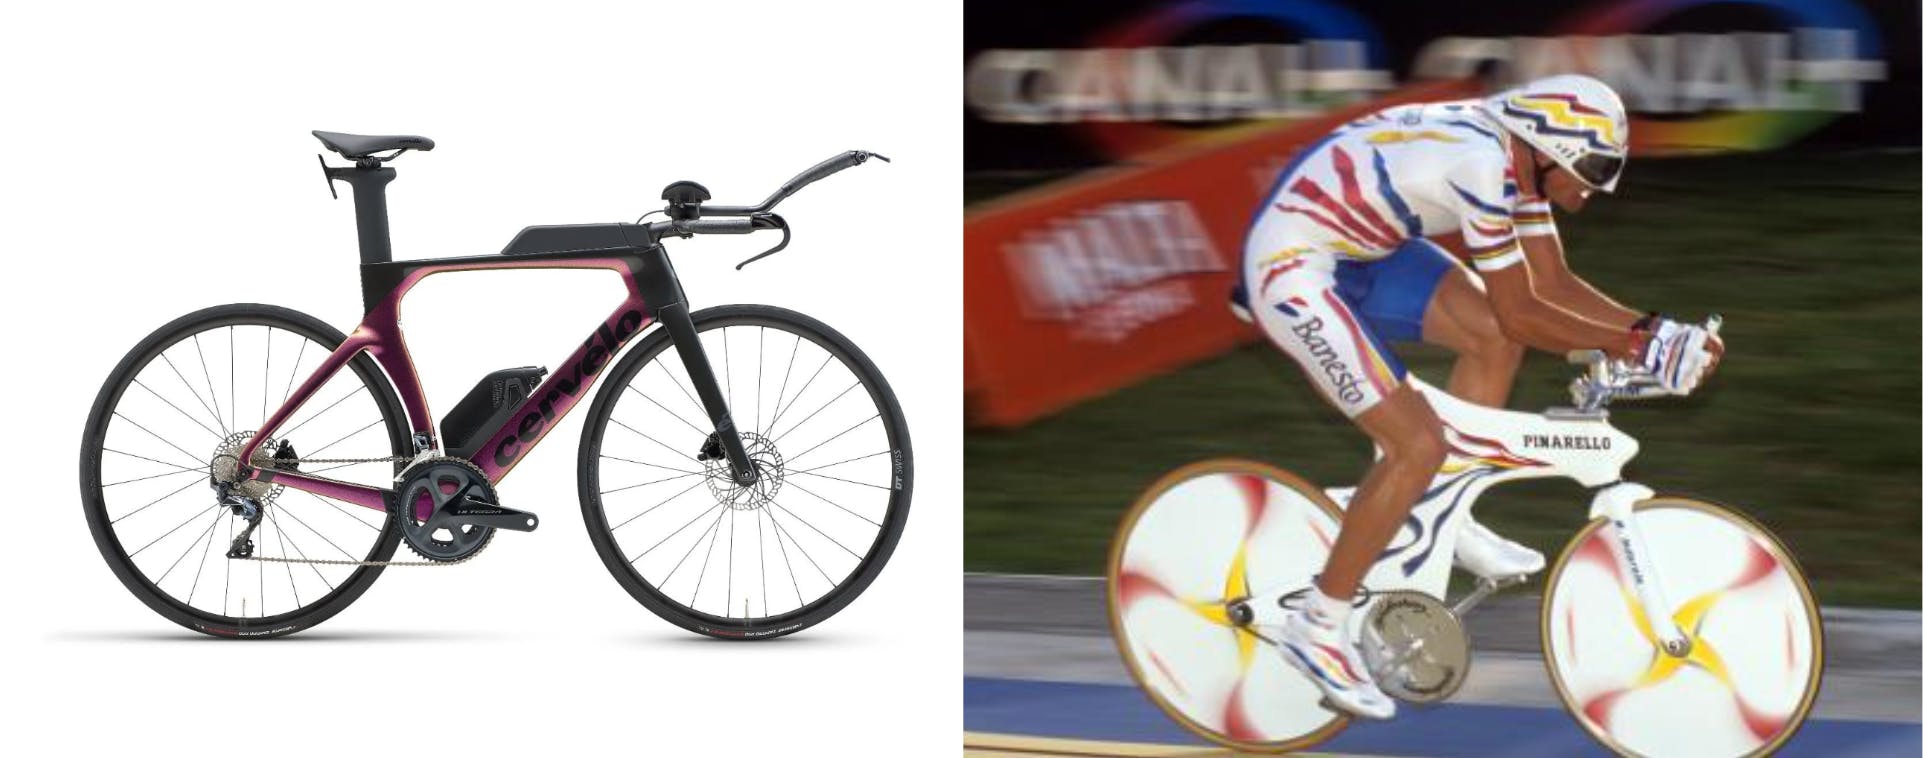 Two photos, on the left is a Cervelo P-series superbike and on the right is Miguel Indurain on a 90s SuperBike.